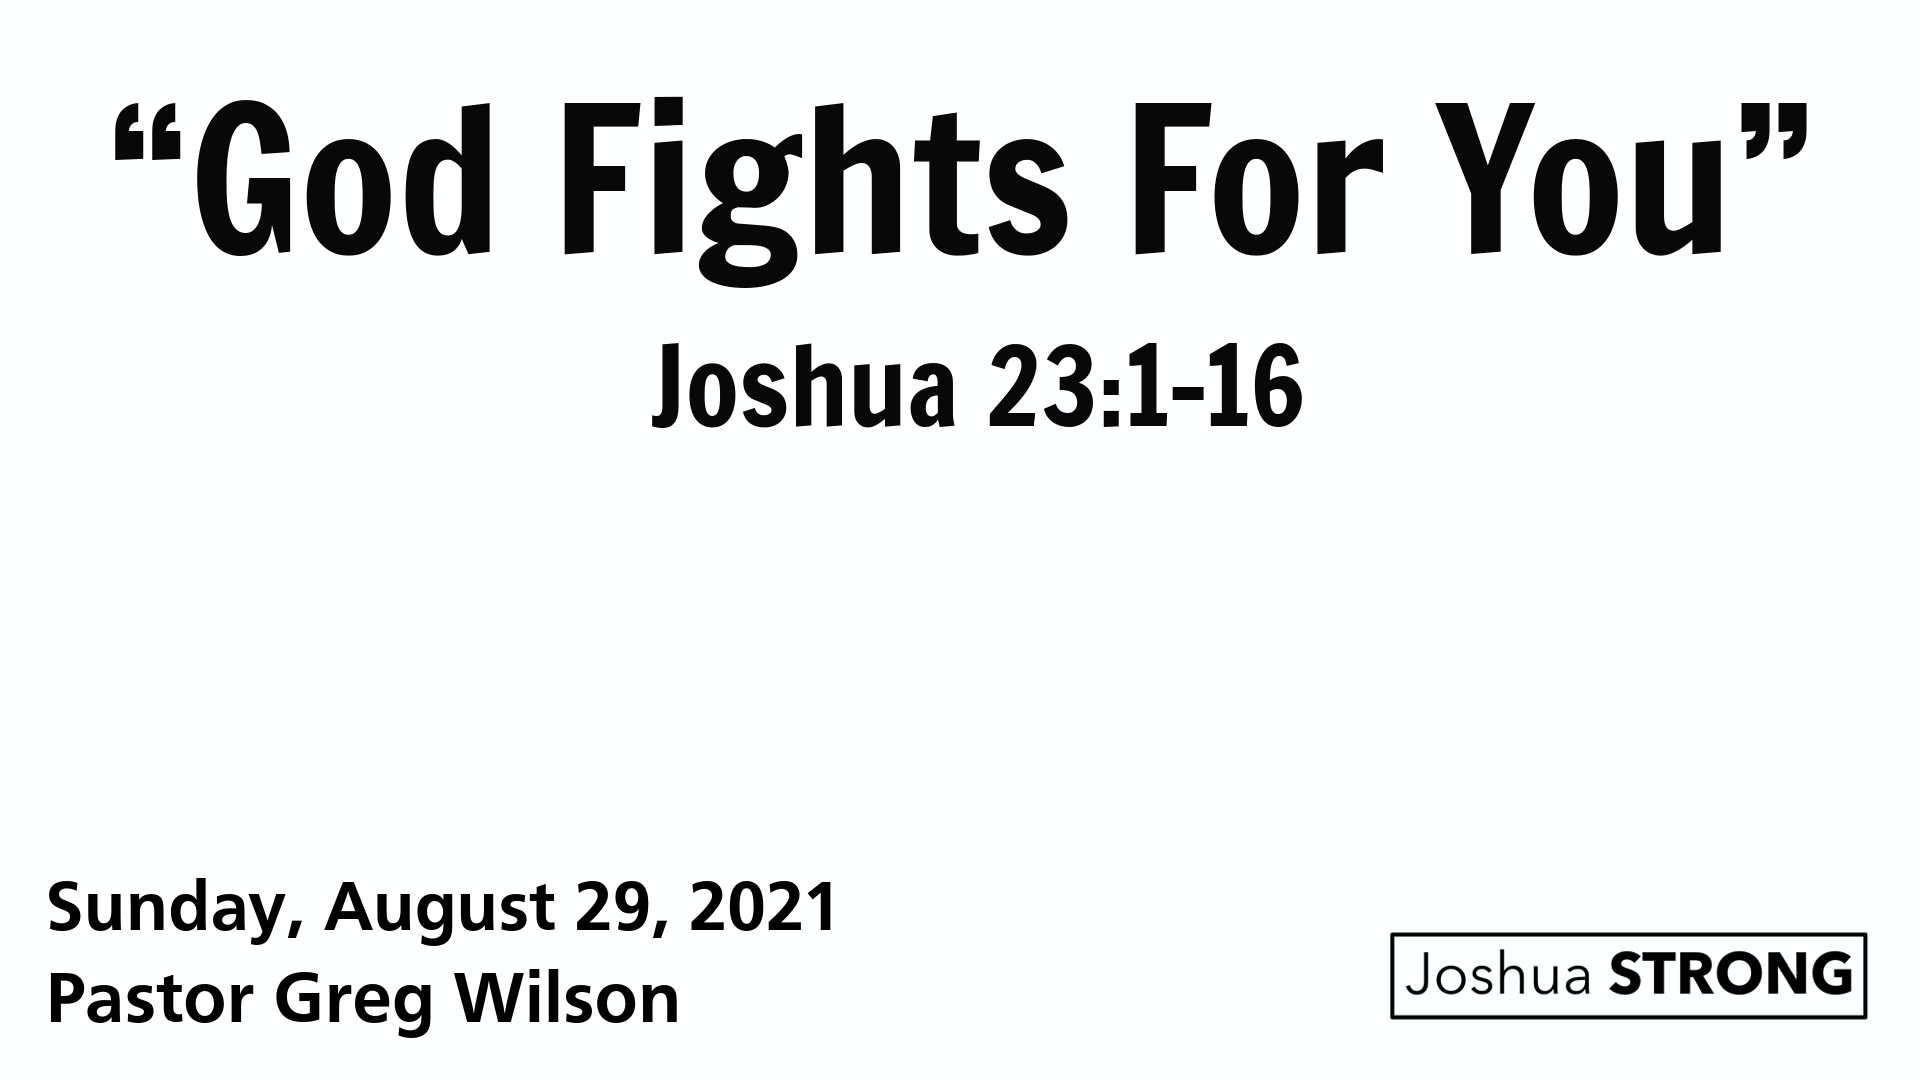 "God Fights For You"